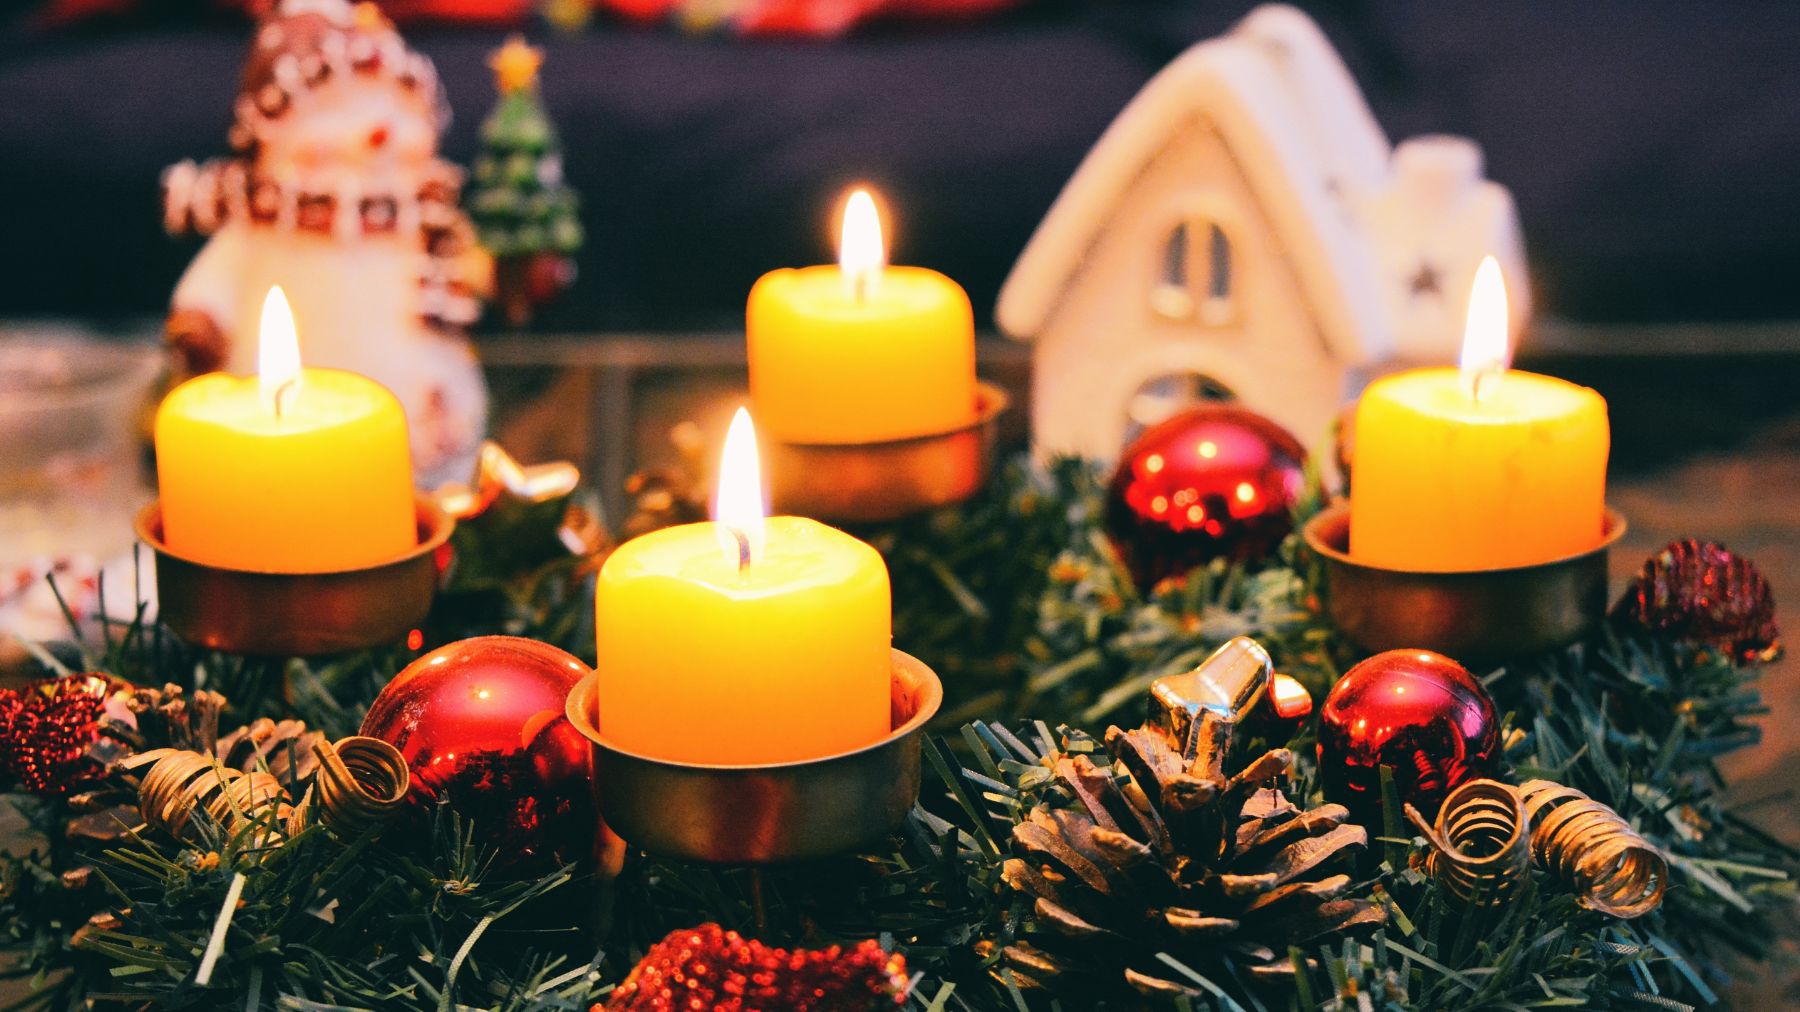 Decorating your home with candles in an eco-friendly way